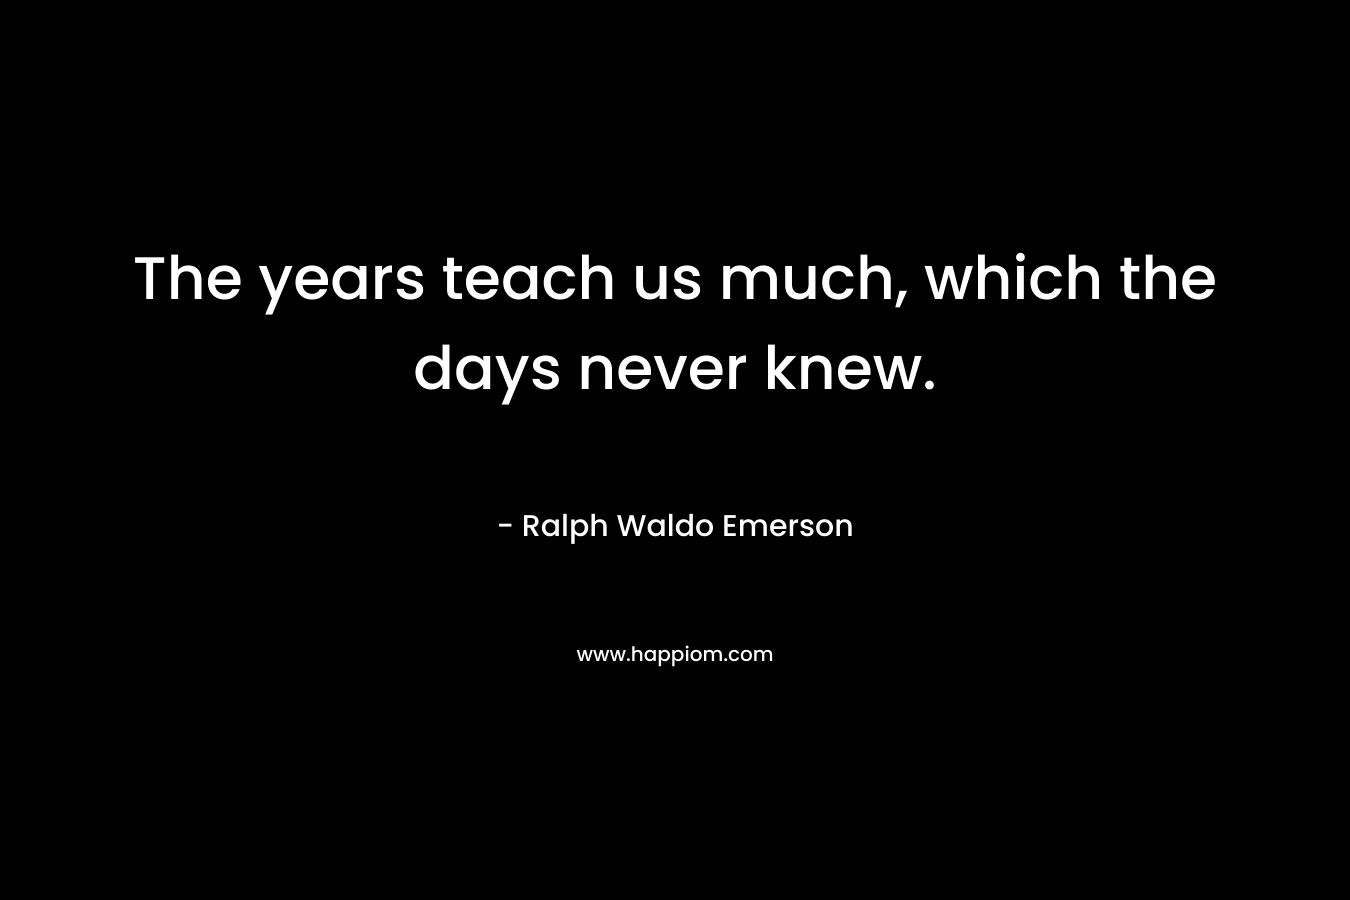 The years teach us much, which the days never knew.